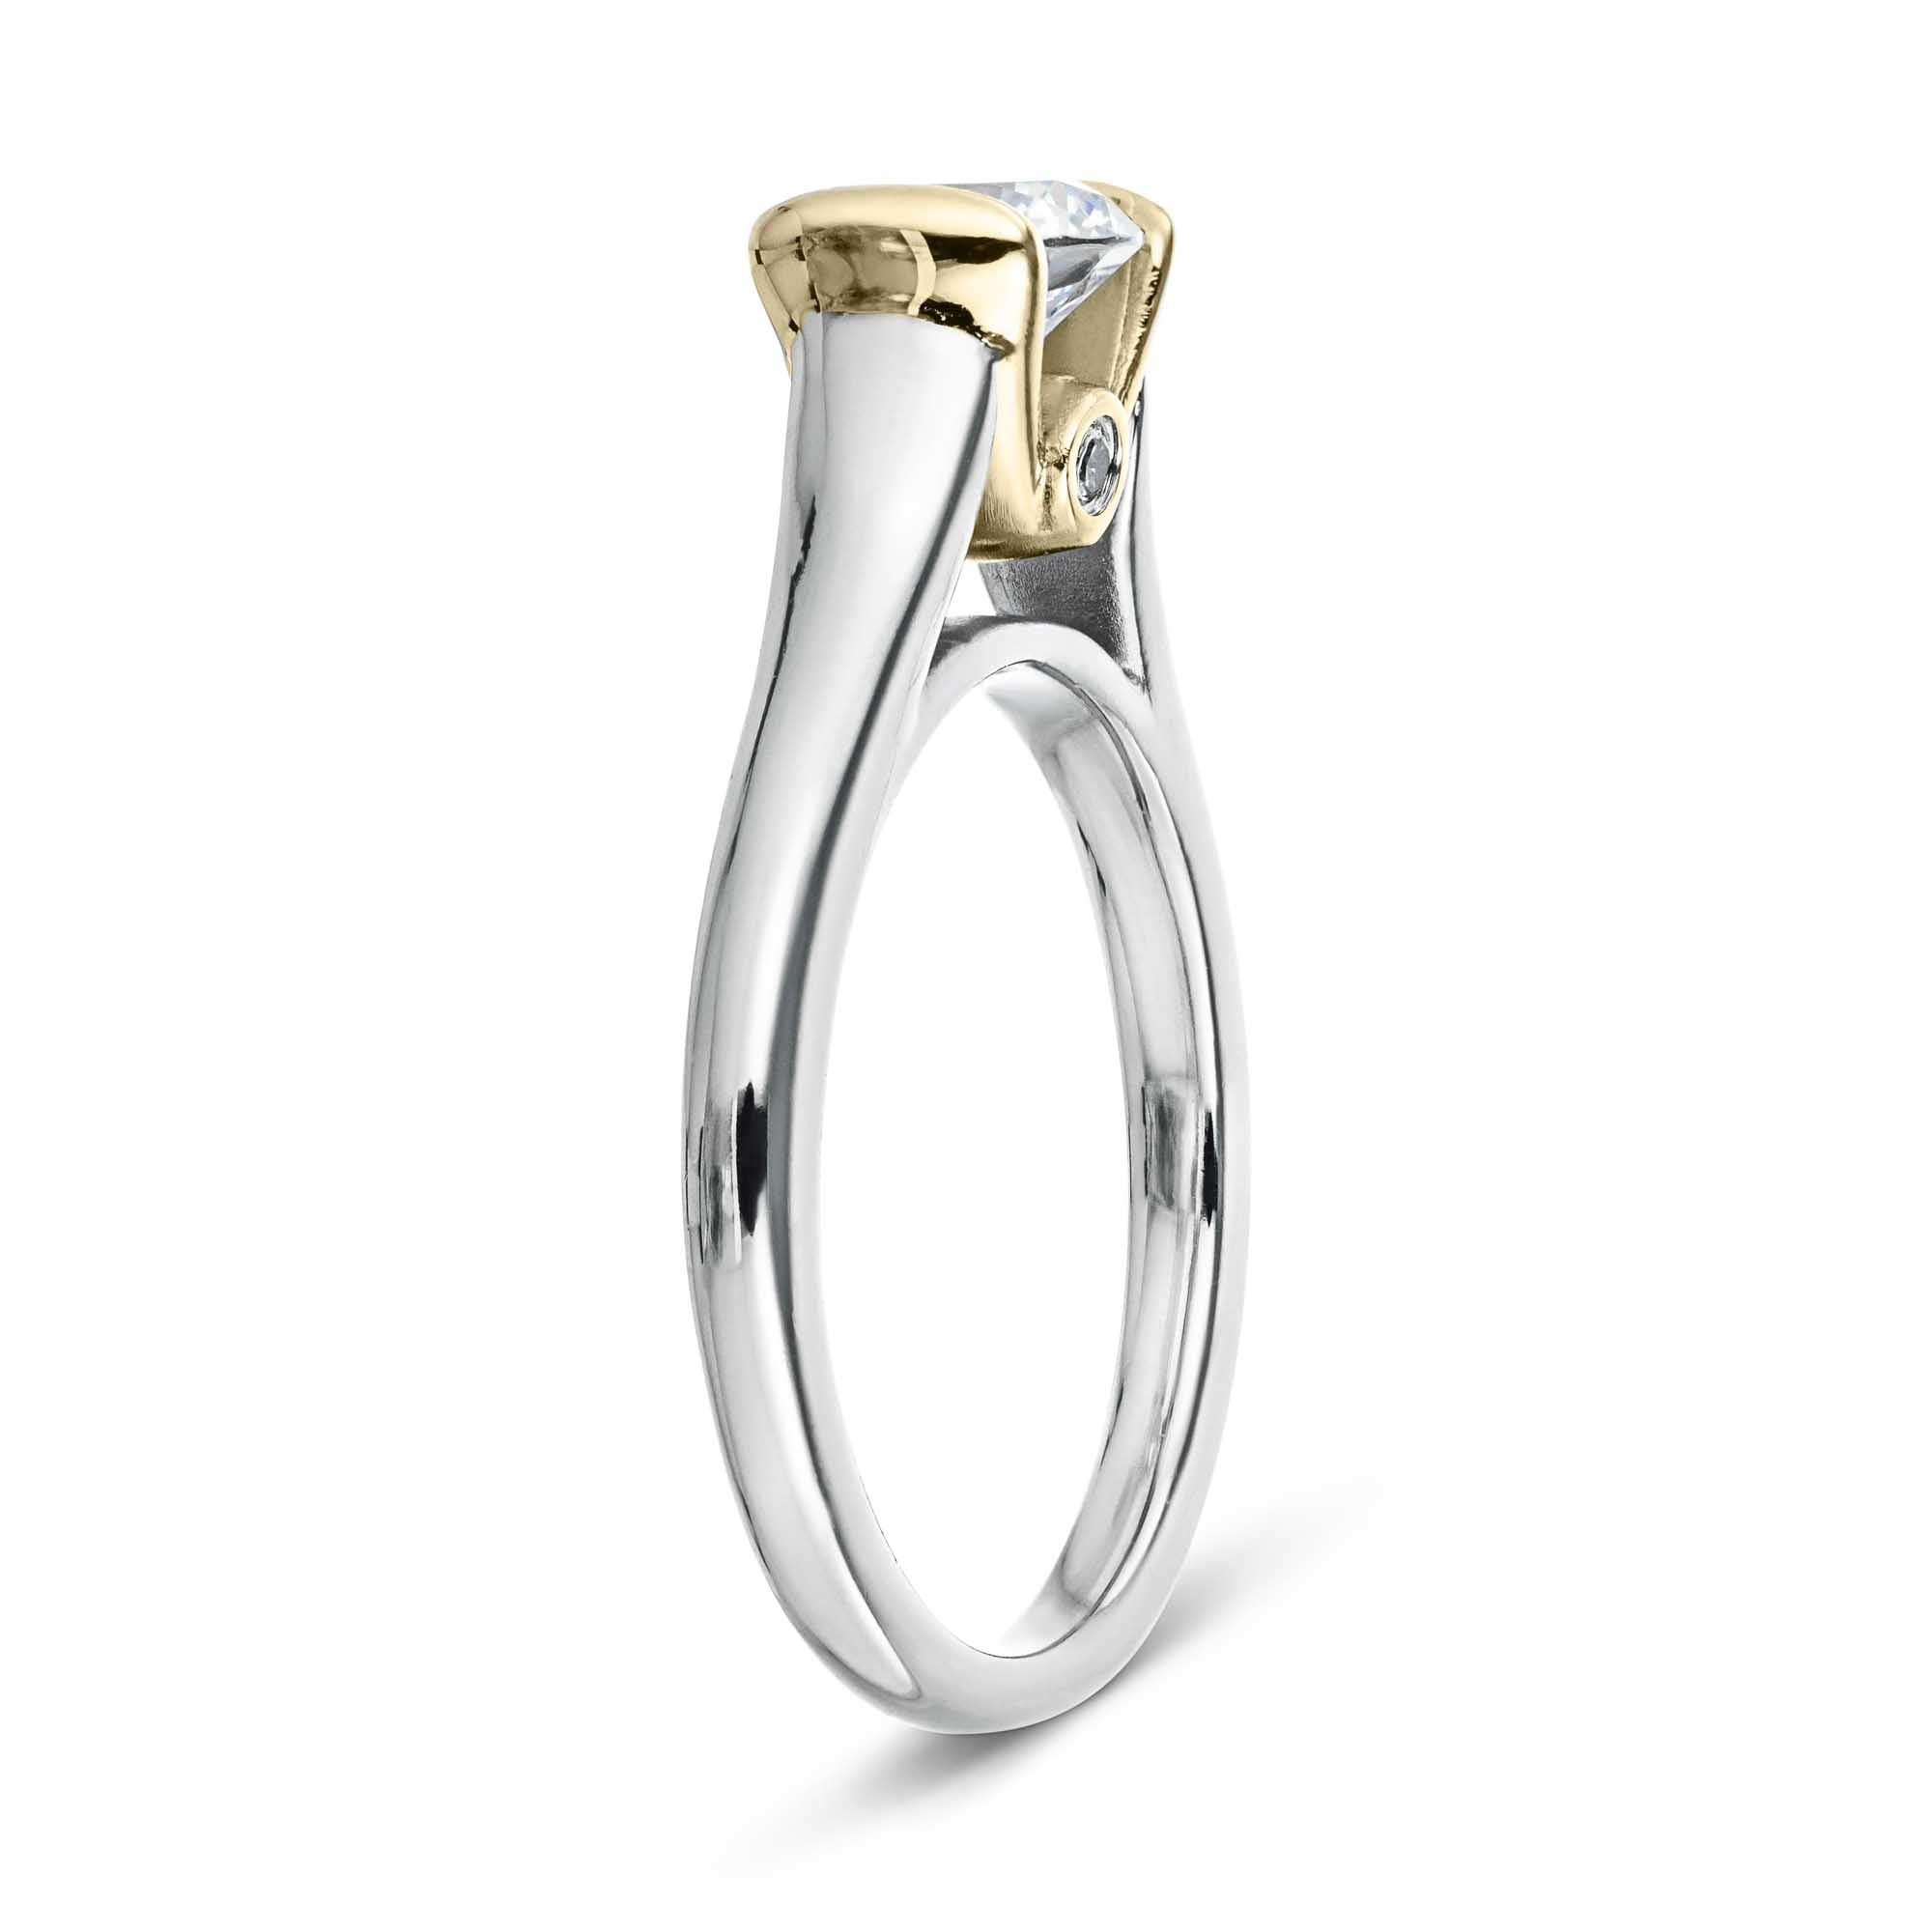 Shown with 1ct Round Cut Lab Grown Diamond in 14k White Gold and 14K Yellow Gold|Unique modern solitaire two tone engagement ring with half bezel set 1ct round cut lab grown diamond above a peek-a-boo diamond in 14k white gold and 14k yellow gold